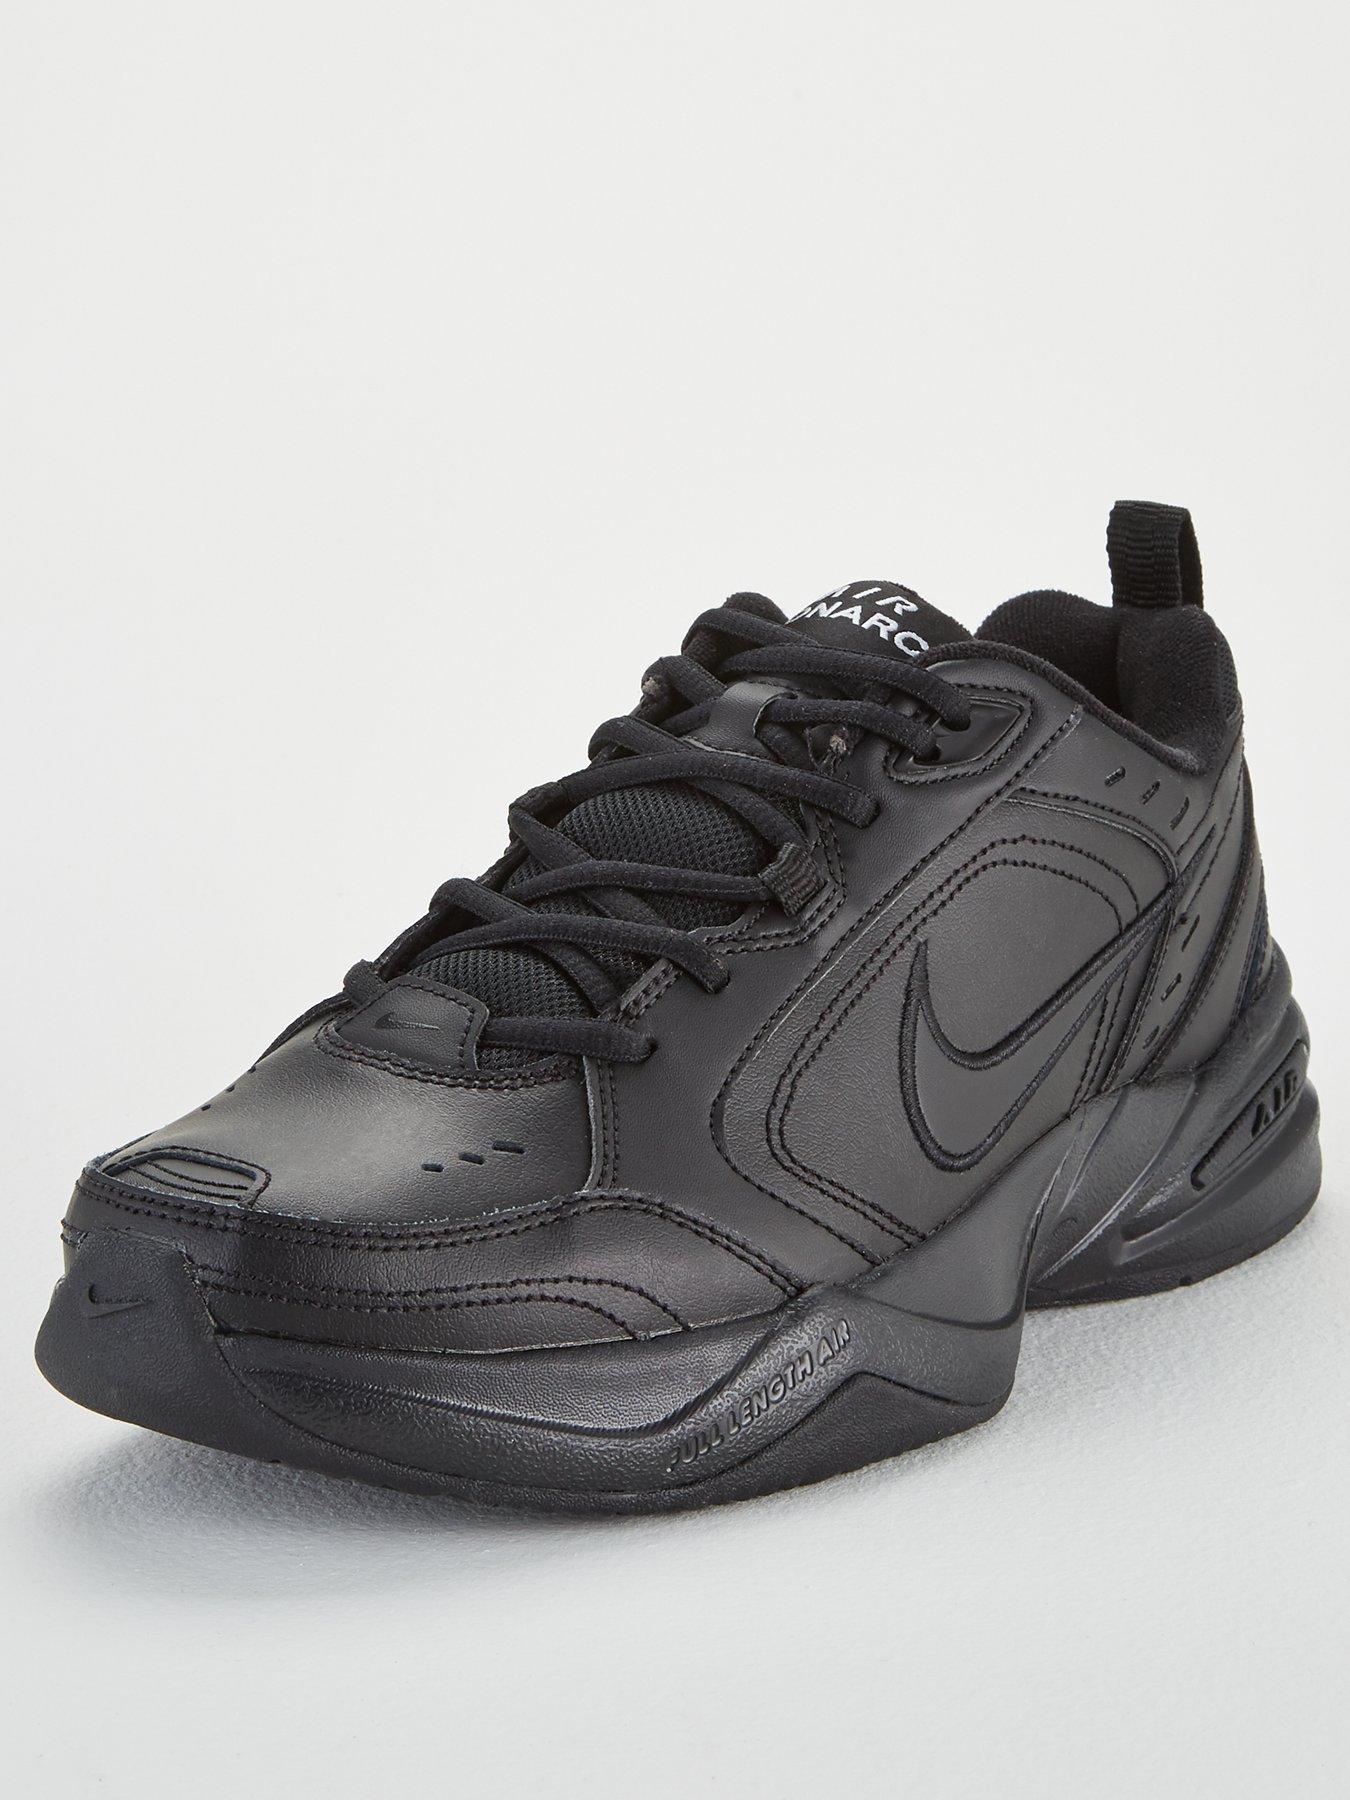 Nike Air Monarch Black Outfit 10bba1